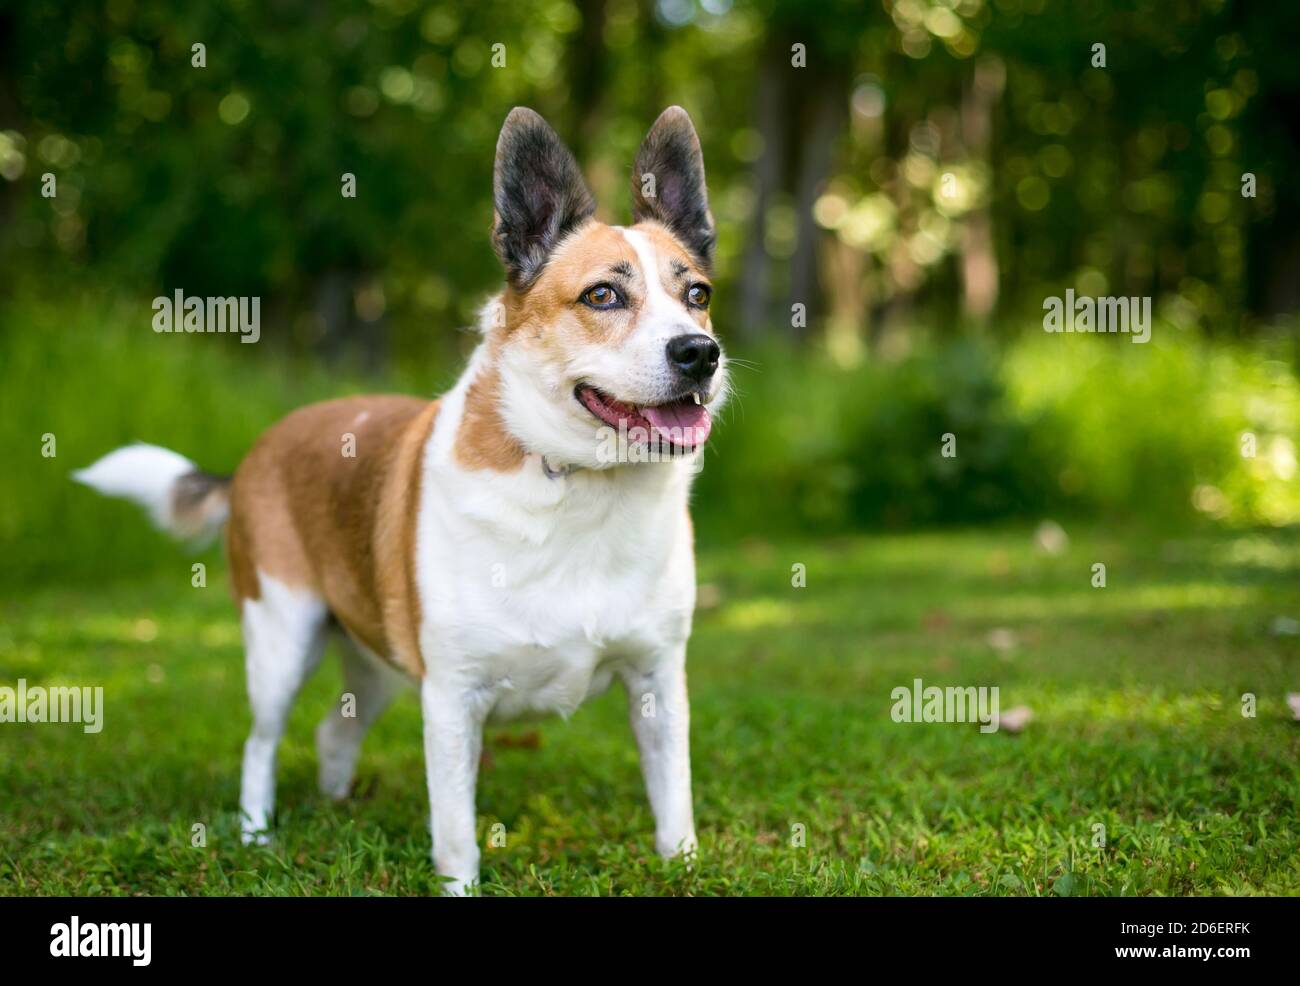 A Welsh Corgi x Terrier mixed breed dog standing outdoors with an alert expression Stock Photo